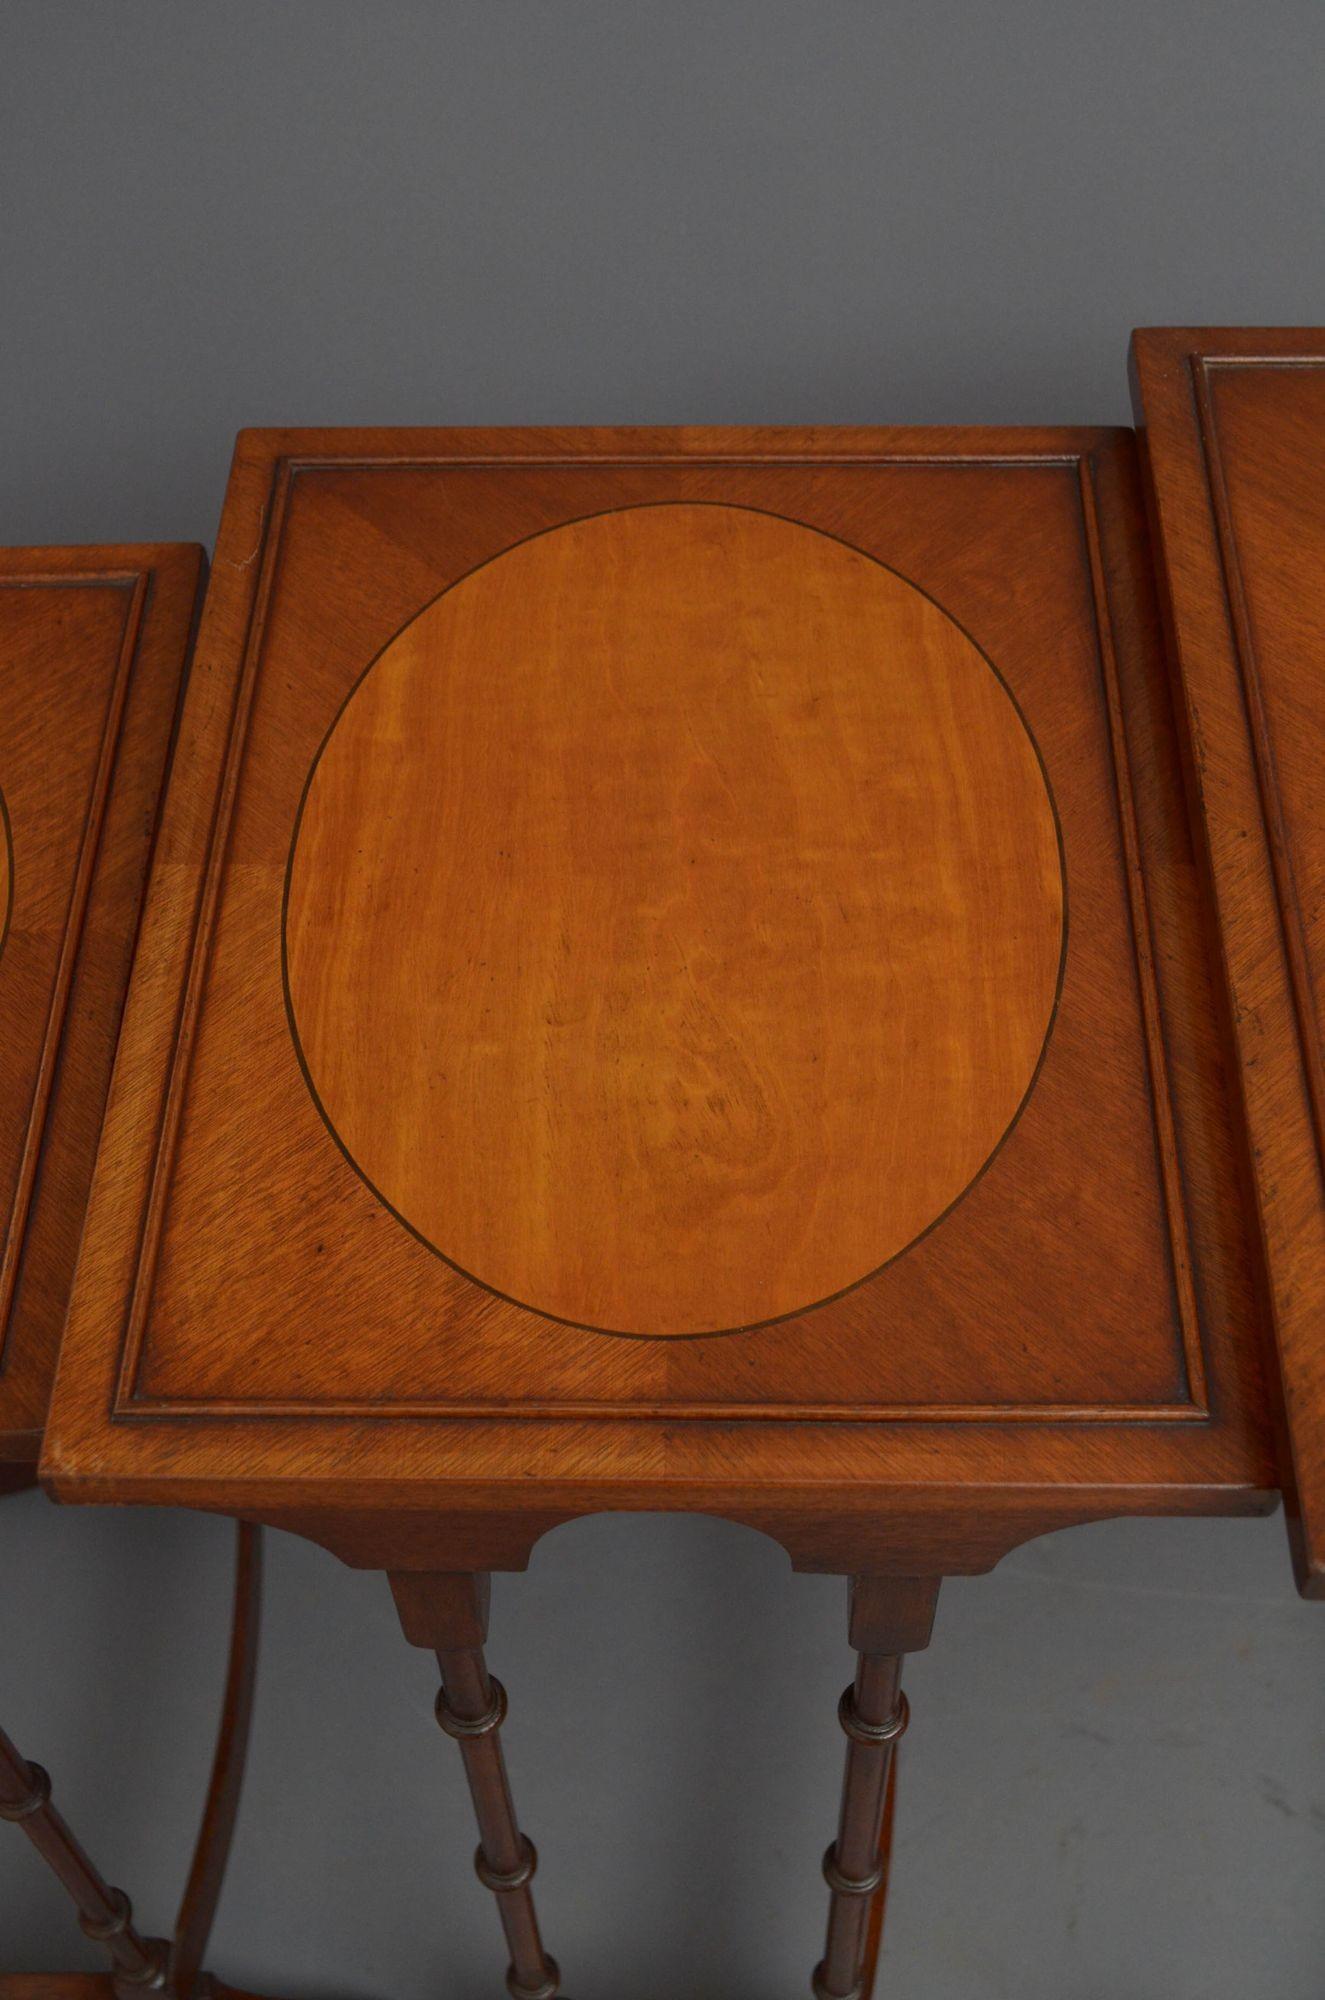 Edwardian Mahogany and Satinwood Nest of Tables For Sale 3